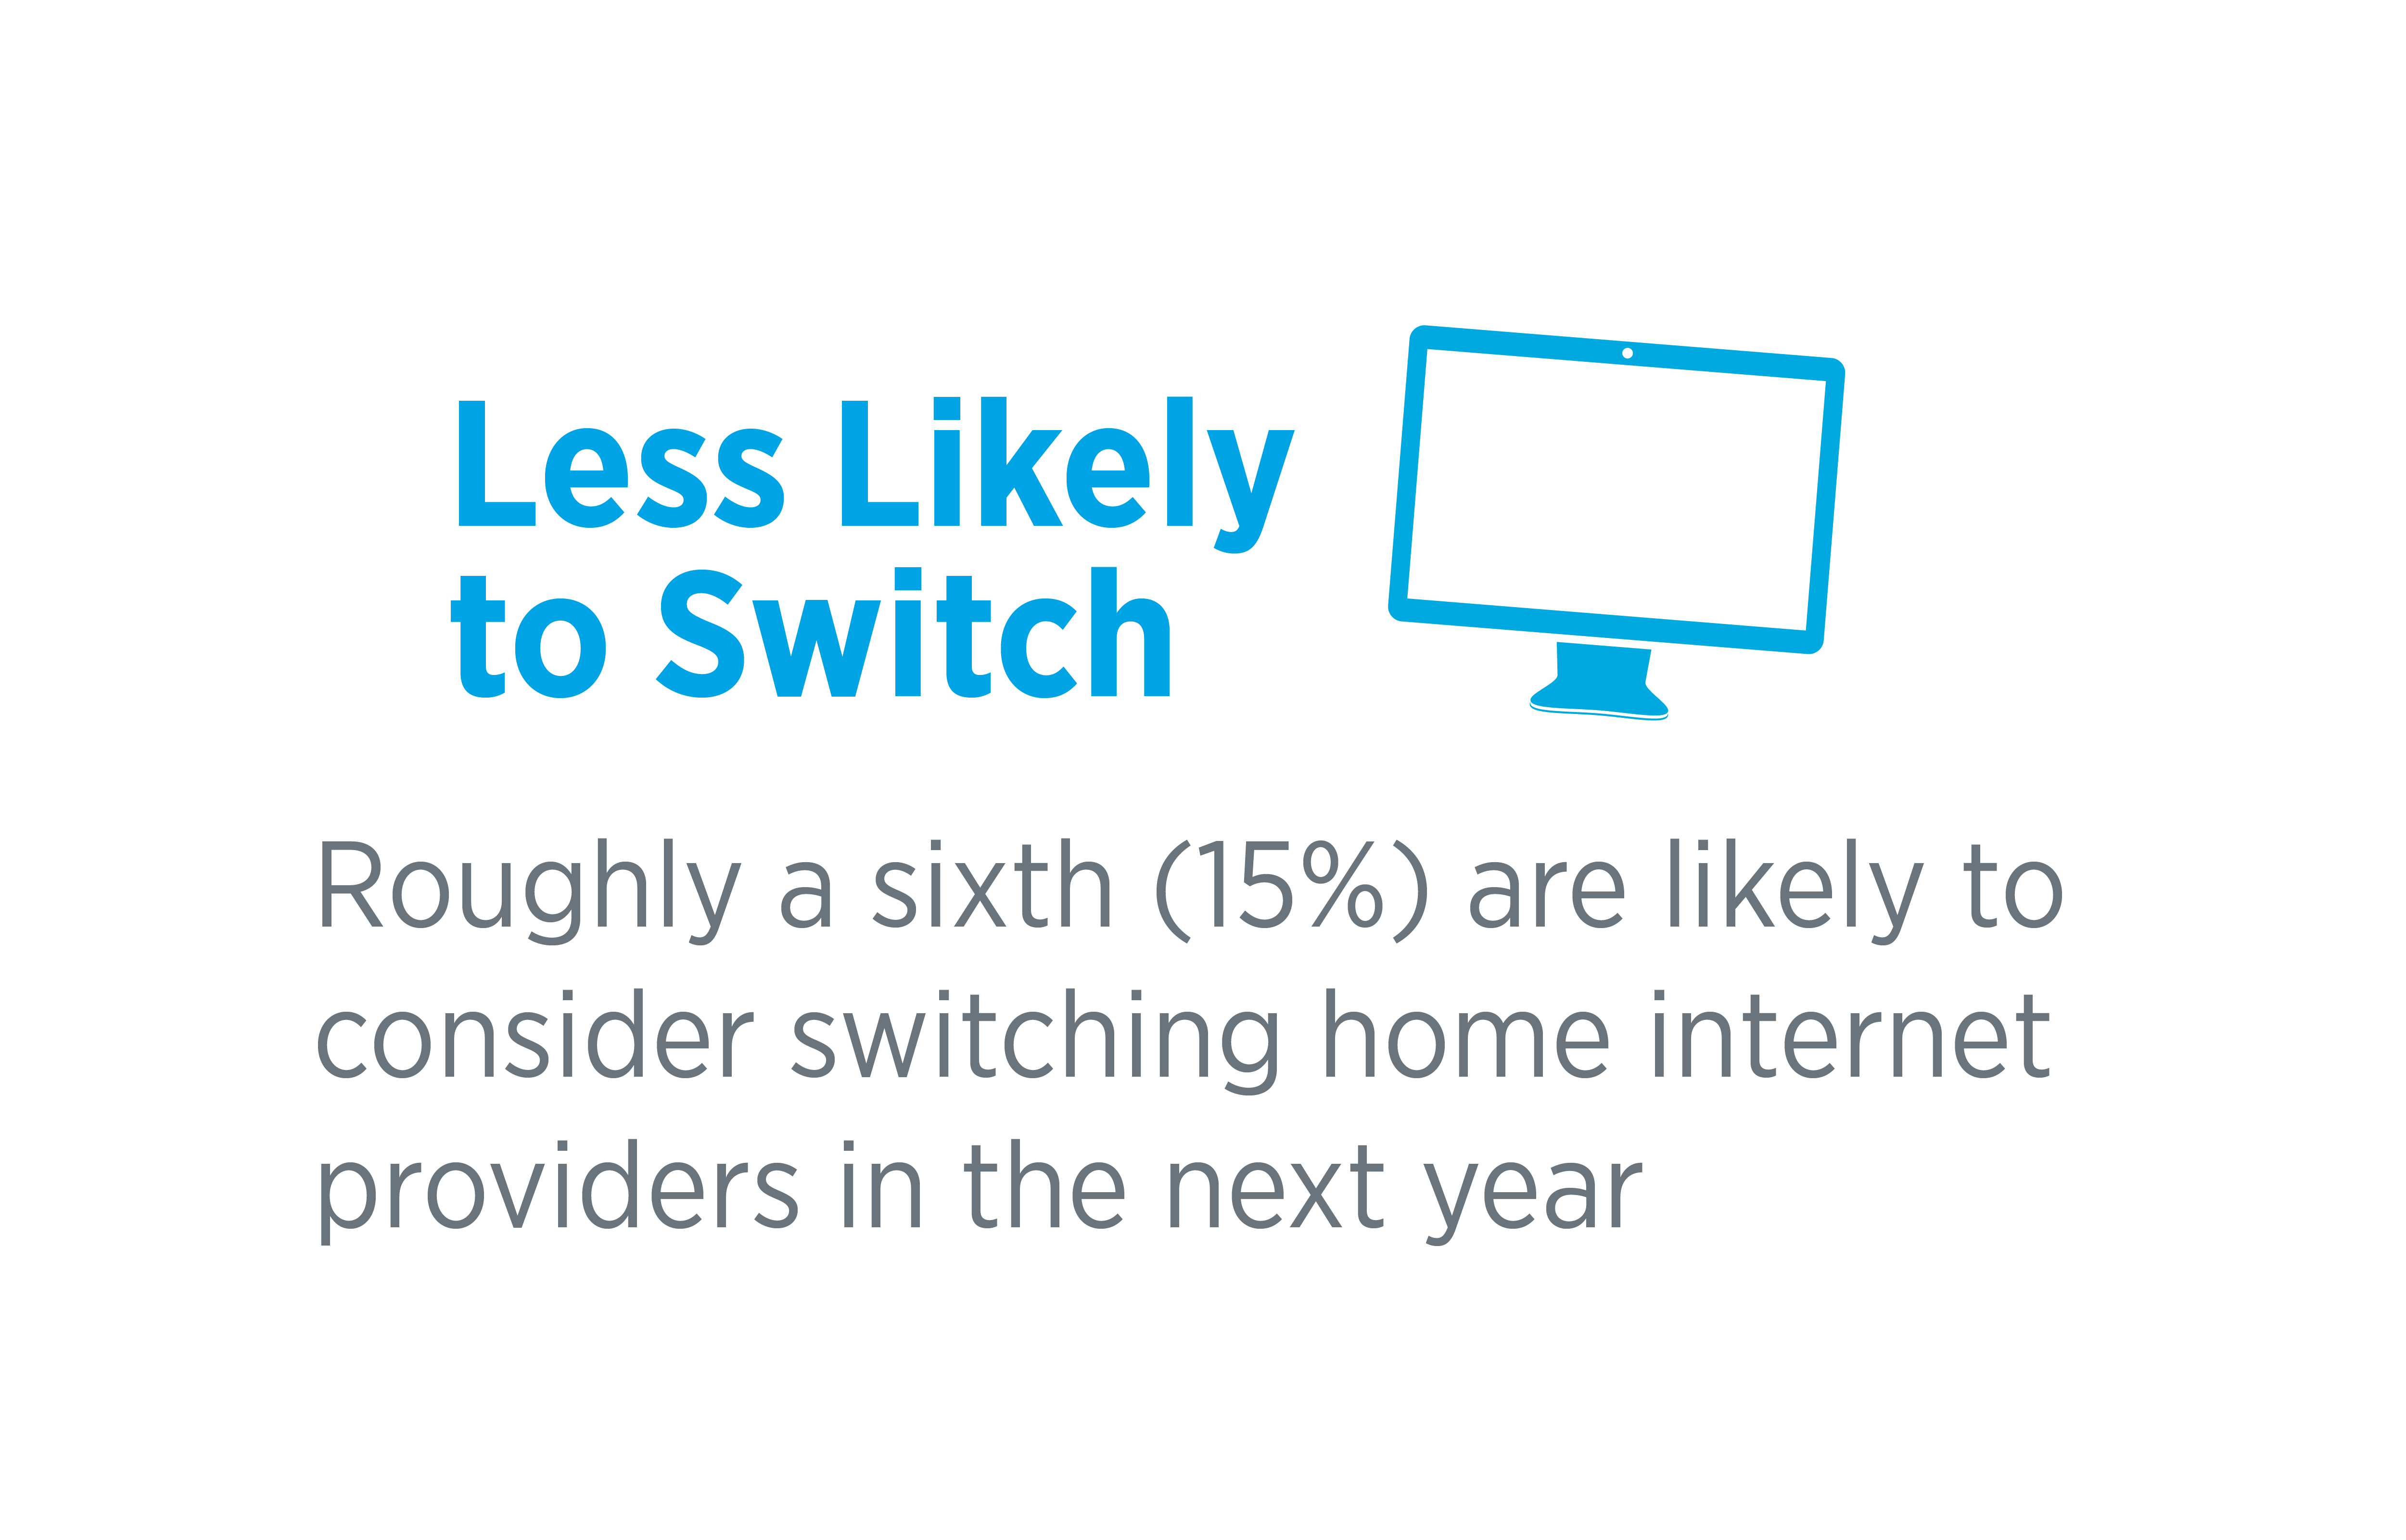 roughly a sixth (15%) are likely to consider switching home internet providers in the next year